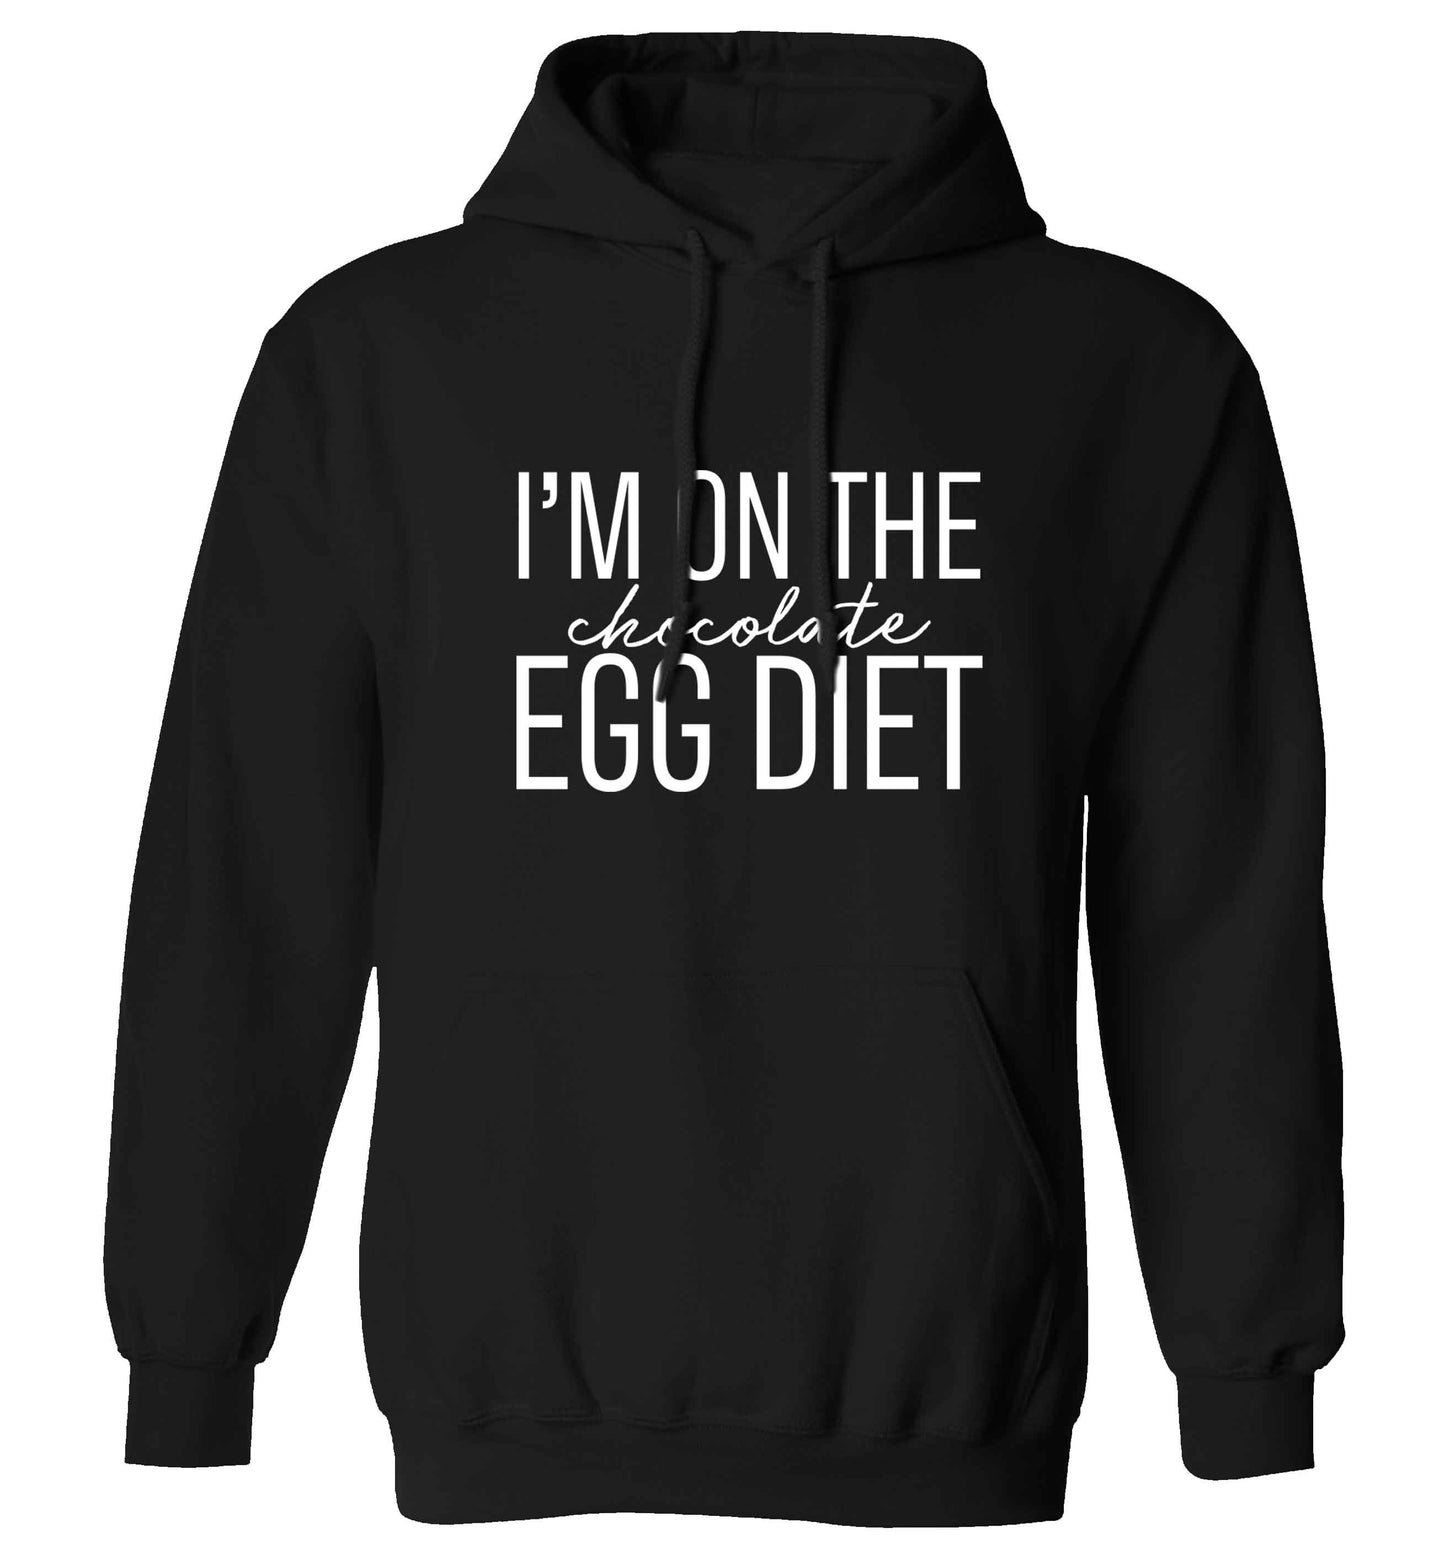 I'm on the chocolate egg diet adults unisex black hoodie 2XL